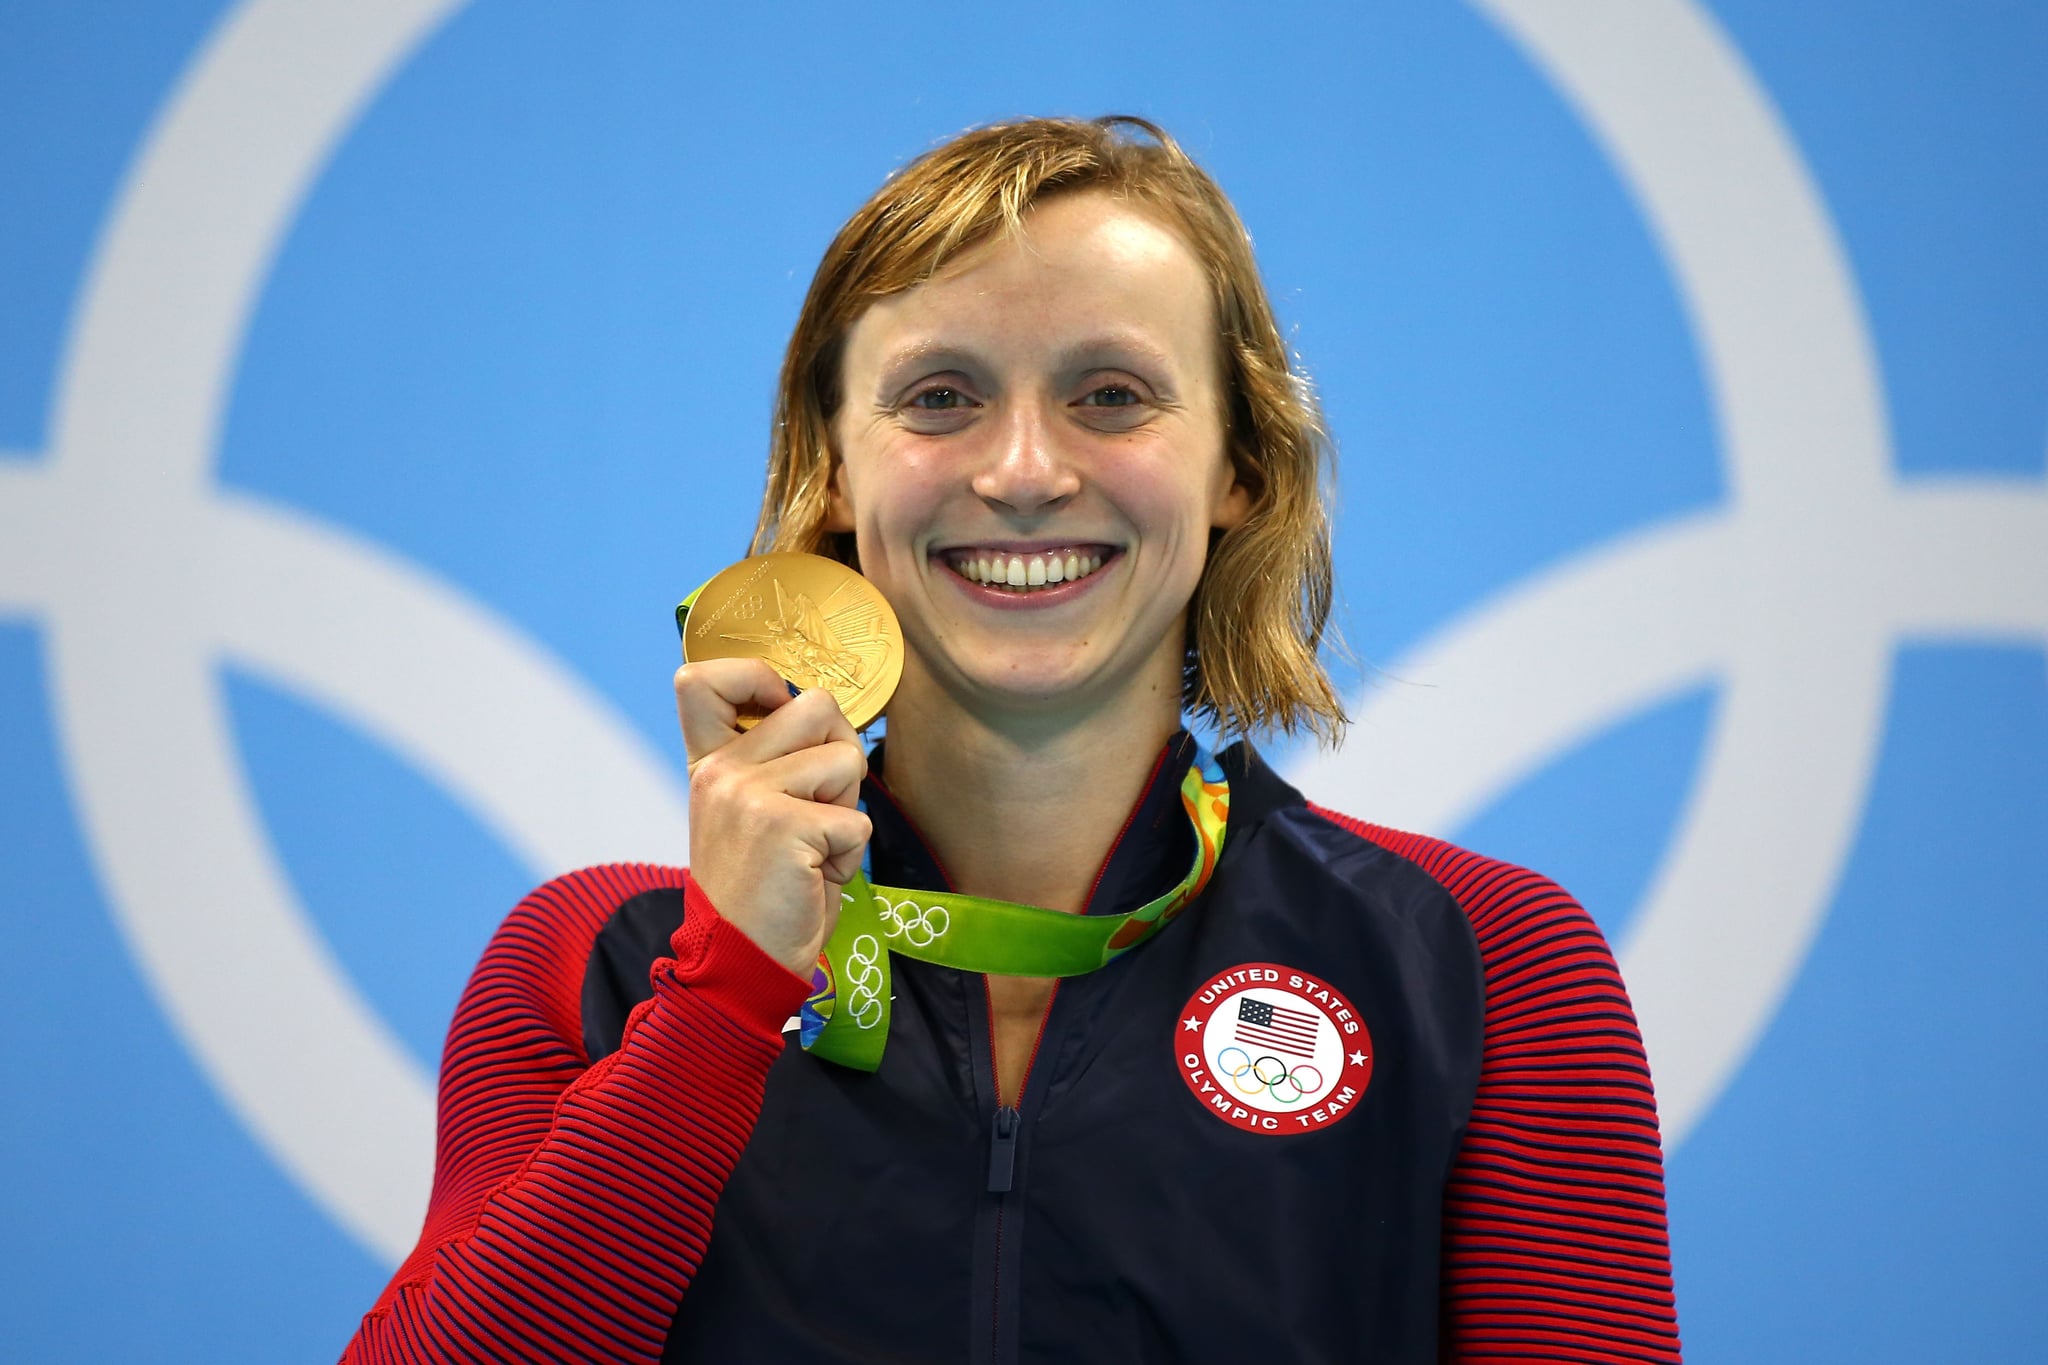 RIO DE JANEIRO, BRAZIL - AUGUST 12:  Katie Ledecky of United States celebrates on the podium after winning gold in the Women's 800m Freestyle Final on Day 7 of the Rio 2016 Olympic Games at the Olympic Aquatics Stadium on August 12, 2016 in Rio de Janeiro, Brazil.  (Photo by Clive Rose/Getty Images)